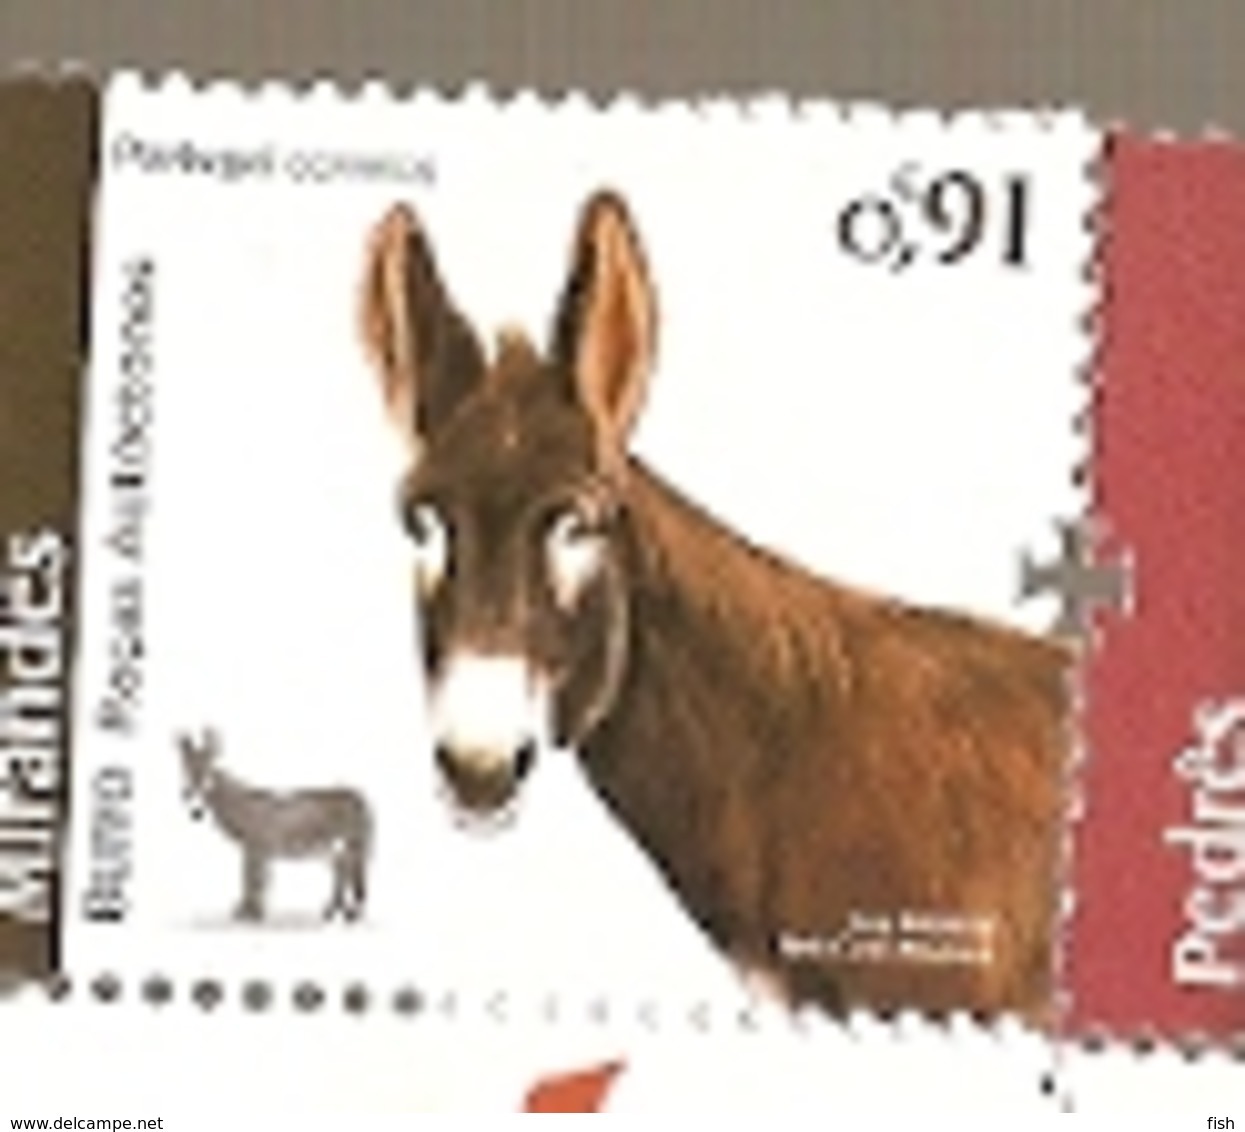 Portugal ** & Autochthonous Breeds Of Portugal, Mirandês Donkeys 2019 (5777) - Anes